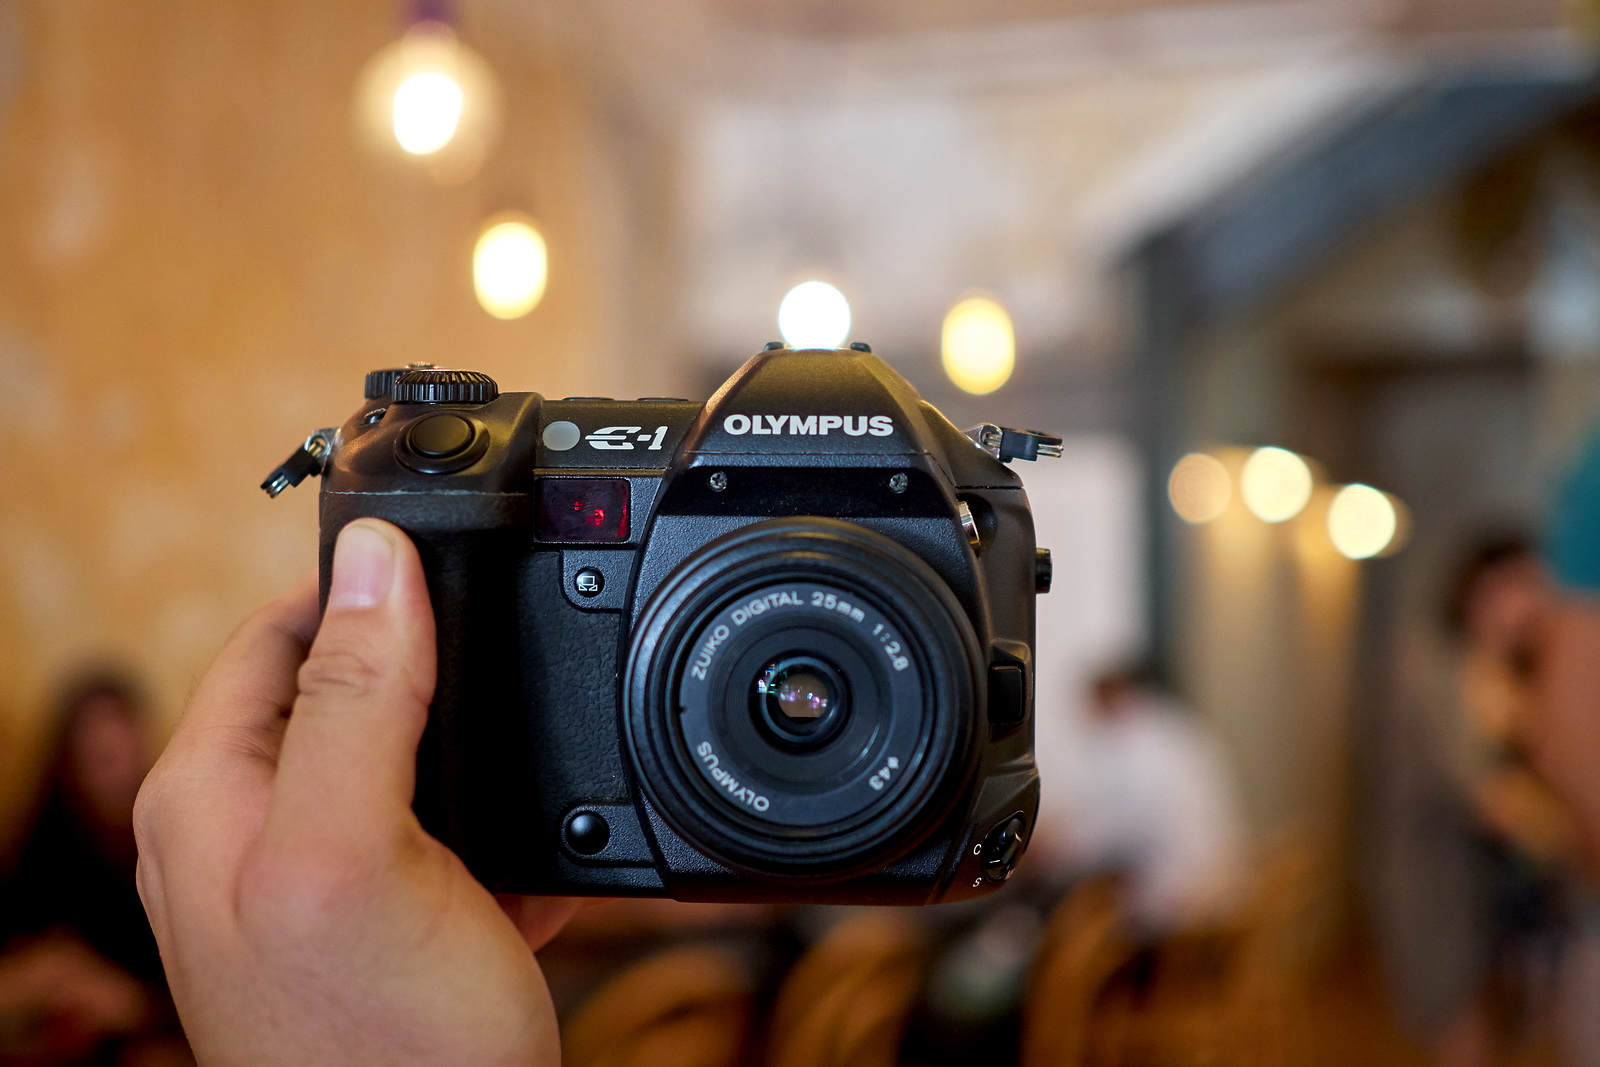 A blast from the past: Robin Wong on the Olympus E-1 – Ming Thein